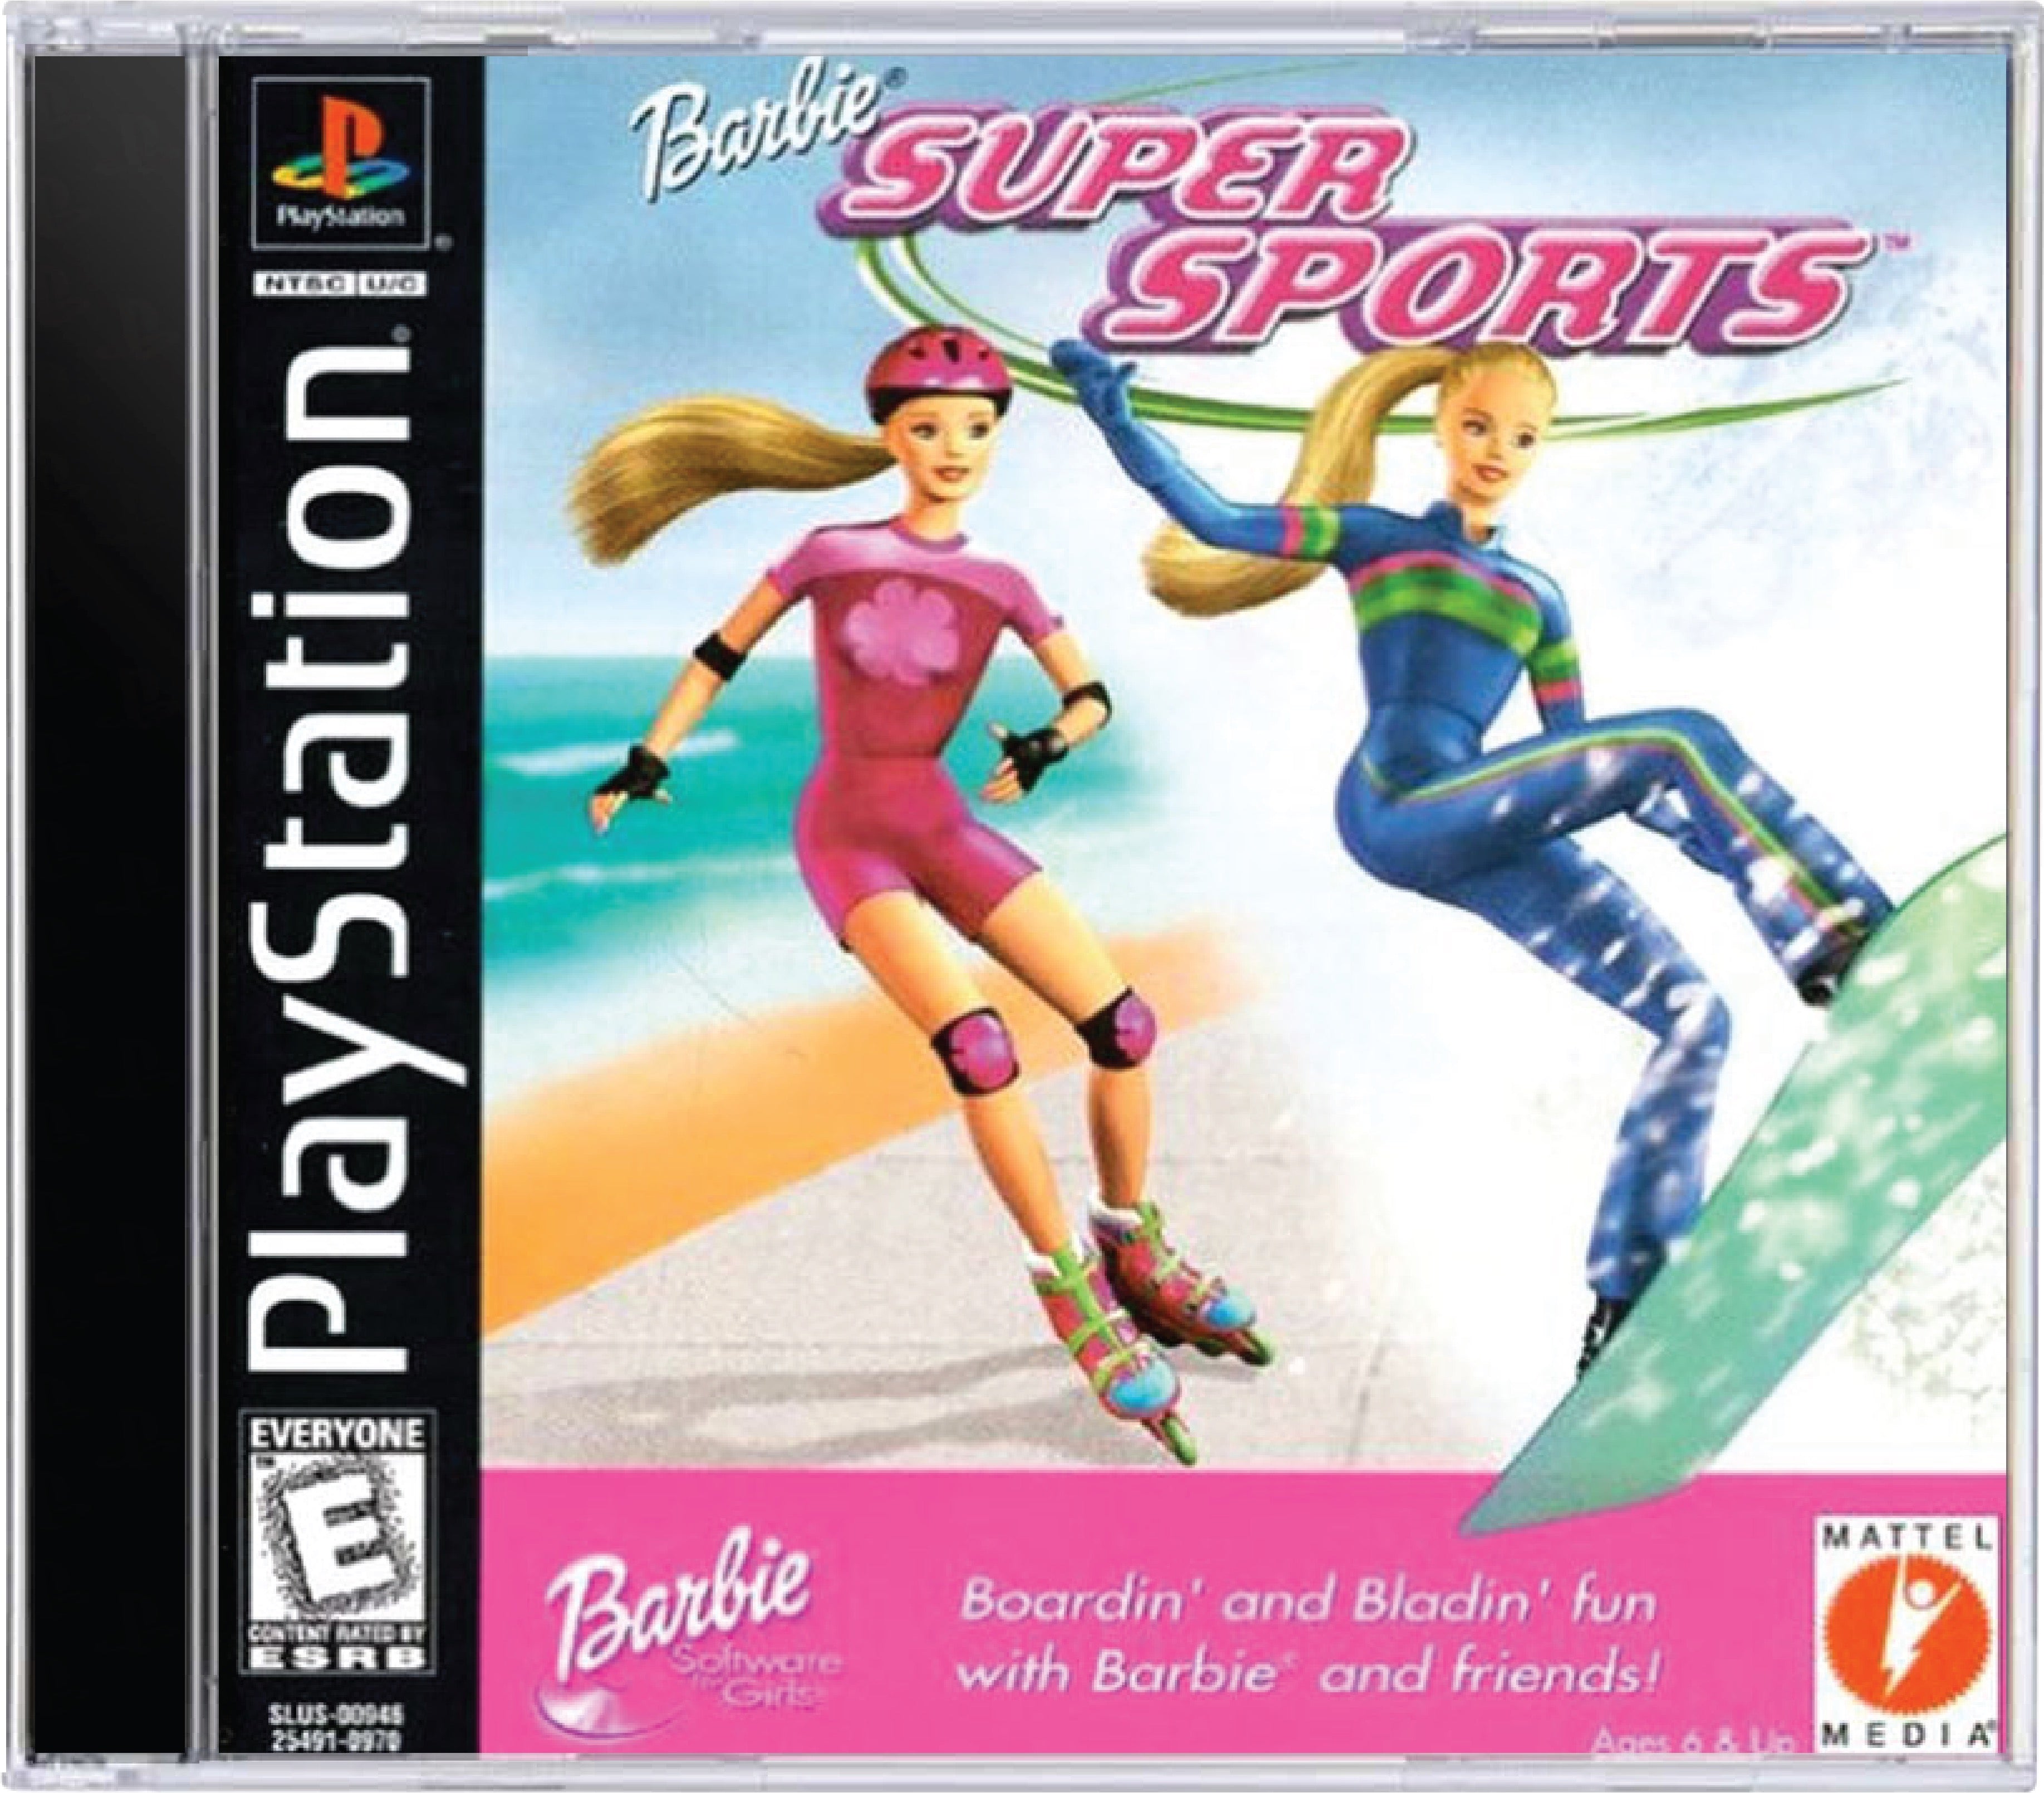 Barbie Super Sports Cover Art and Product Photo